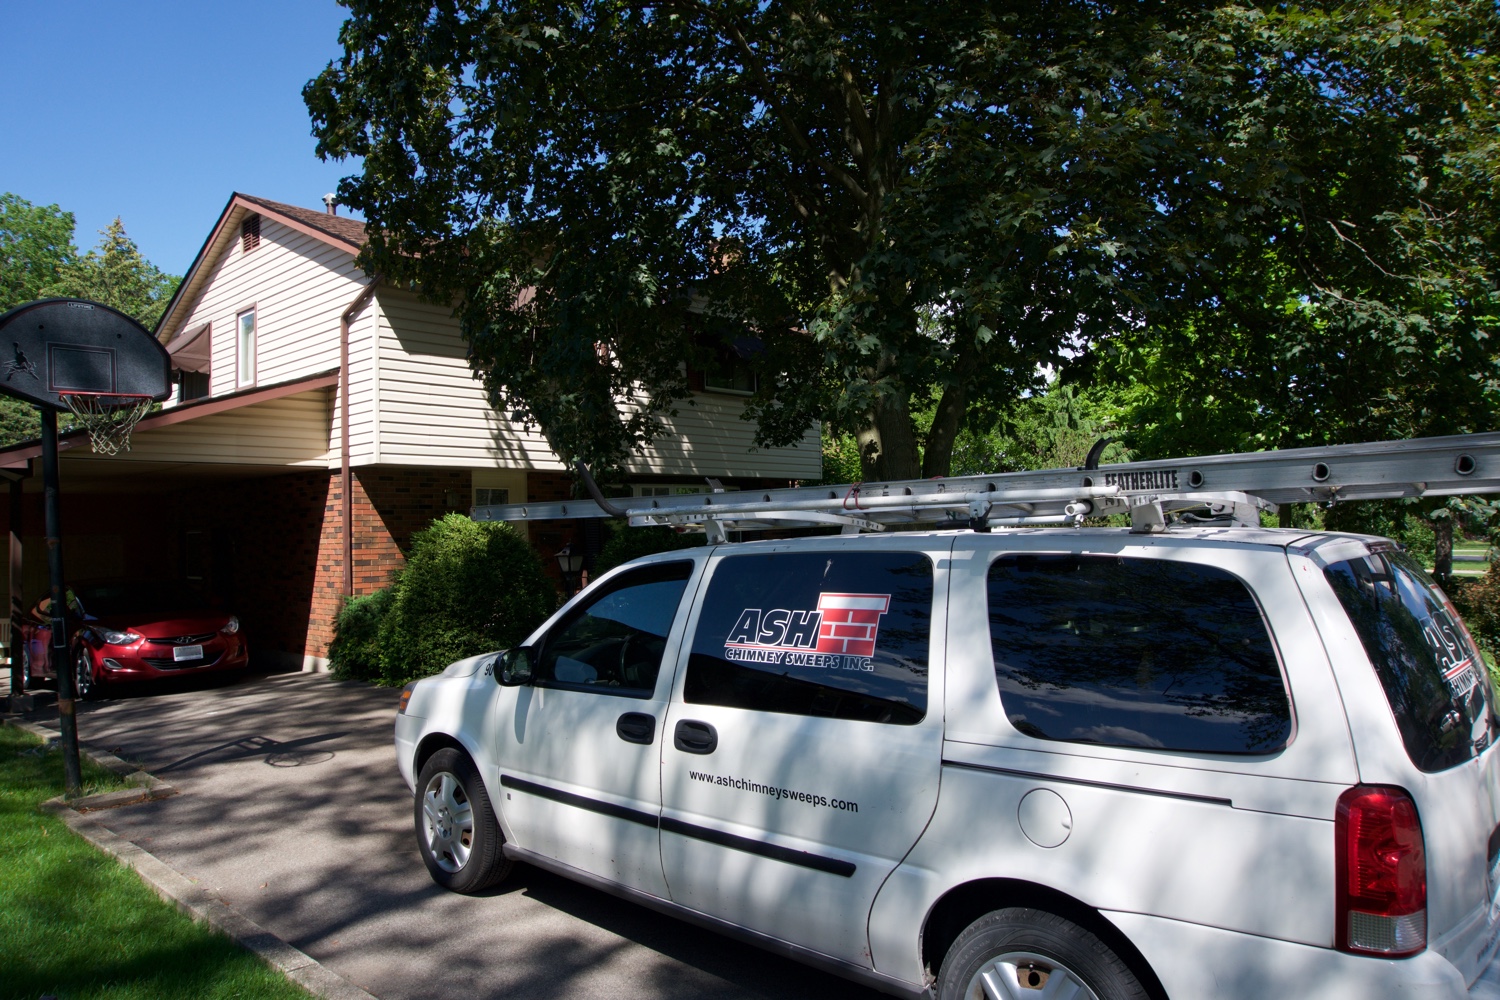 Chimney cleanings, chimney covers, WETT inspections, animal and blockage removals.